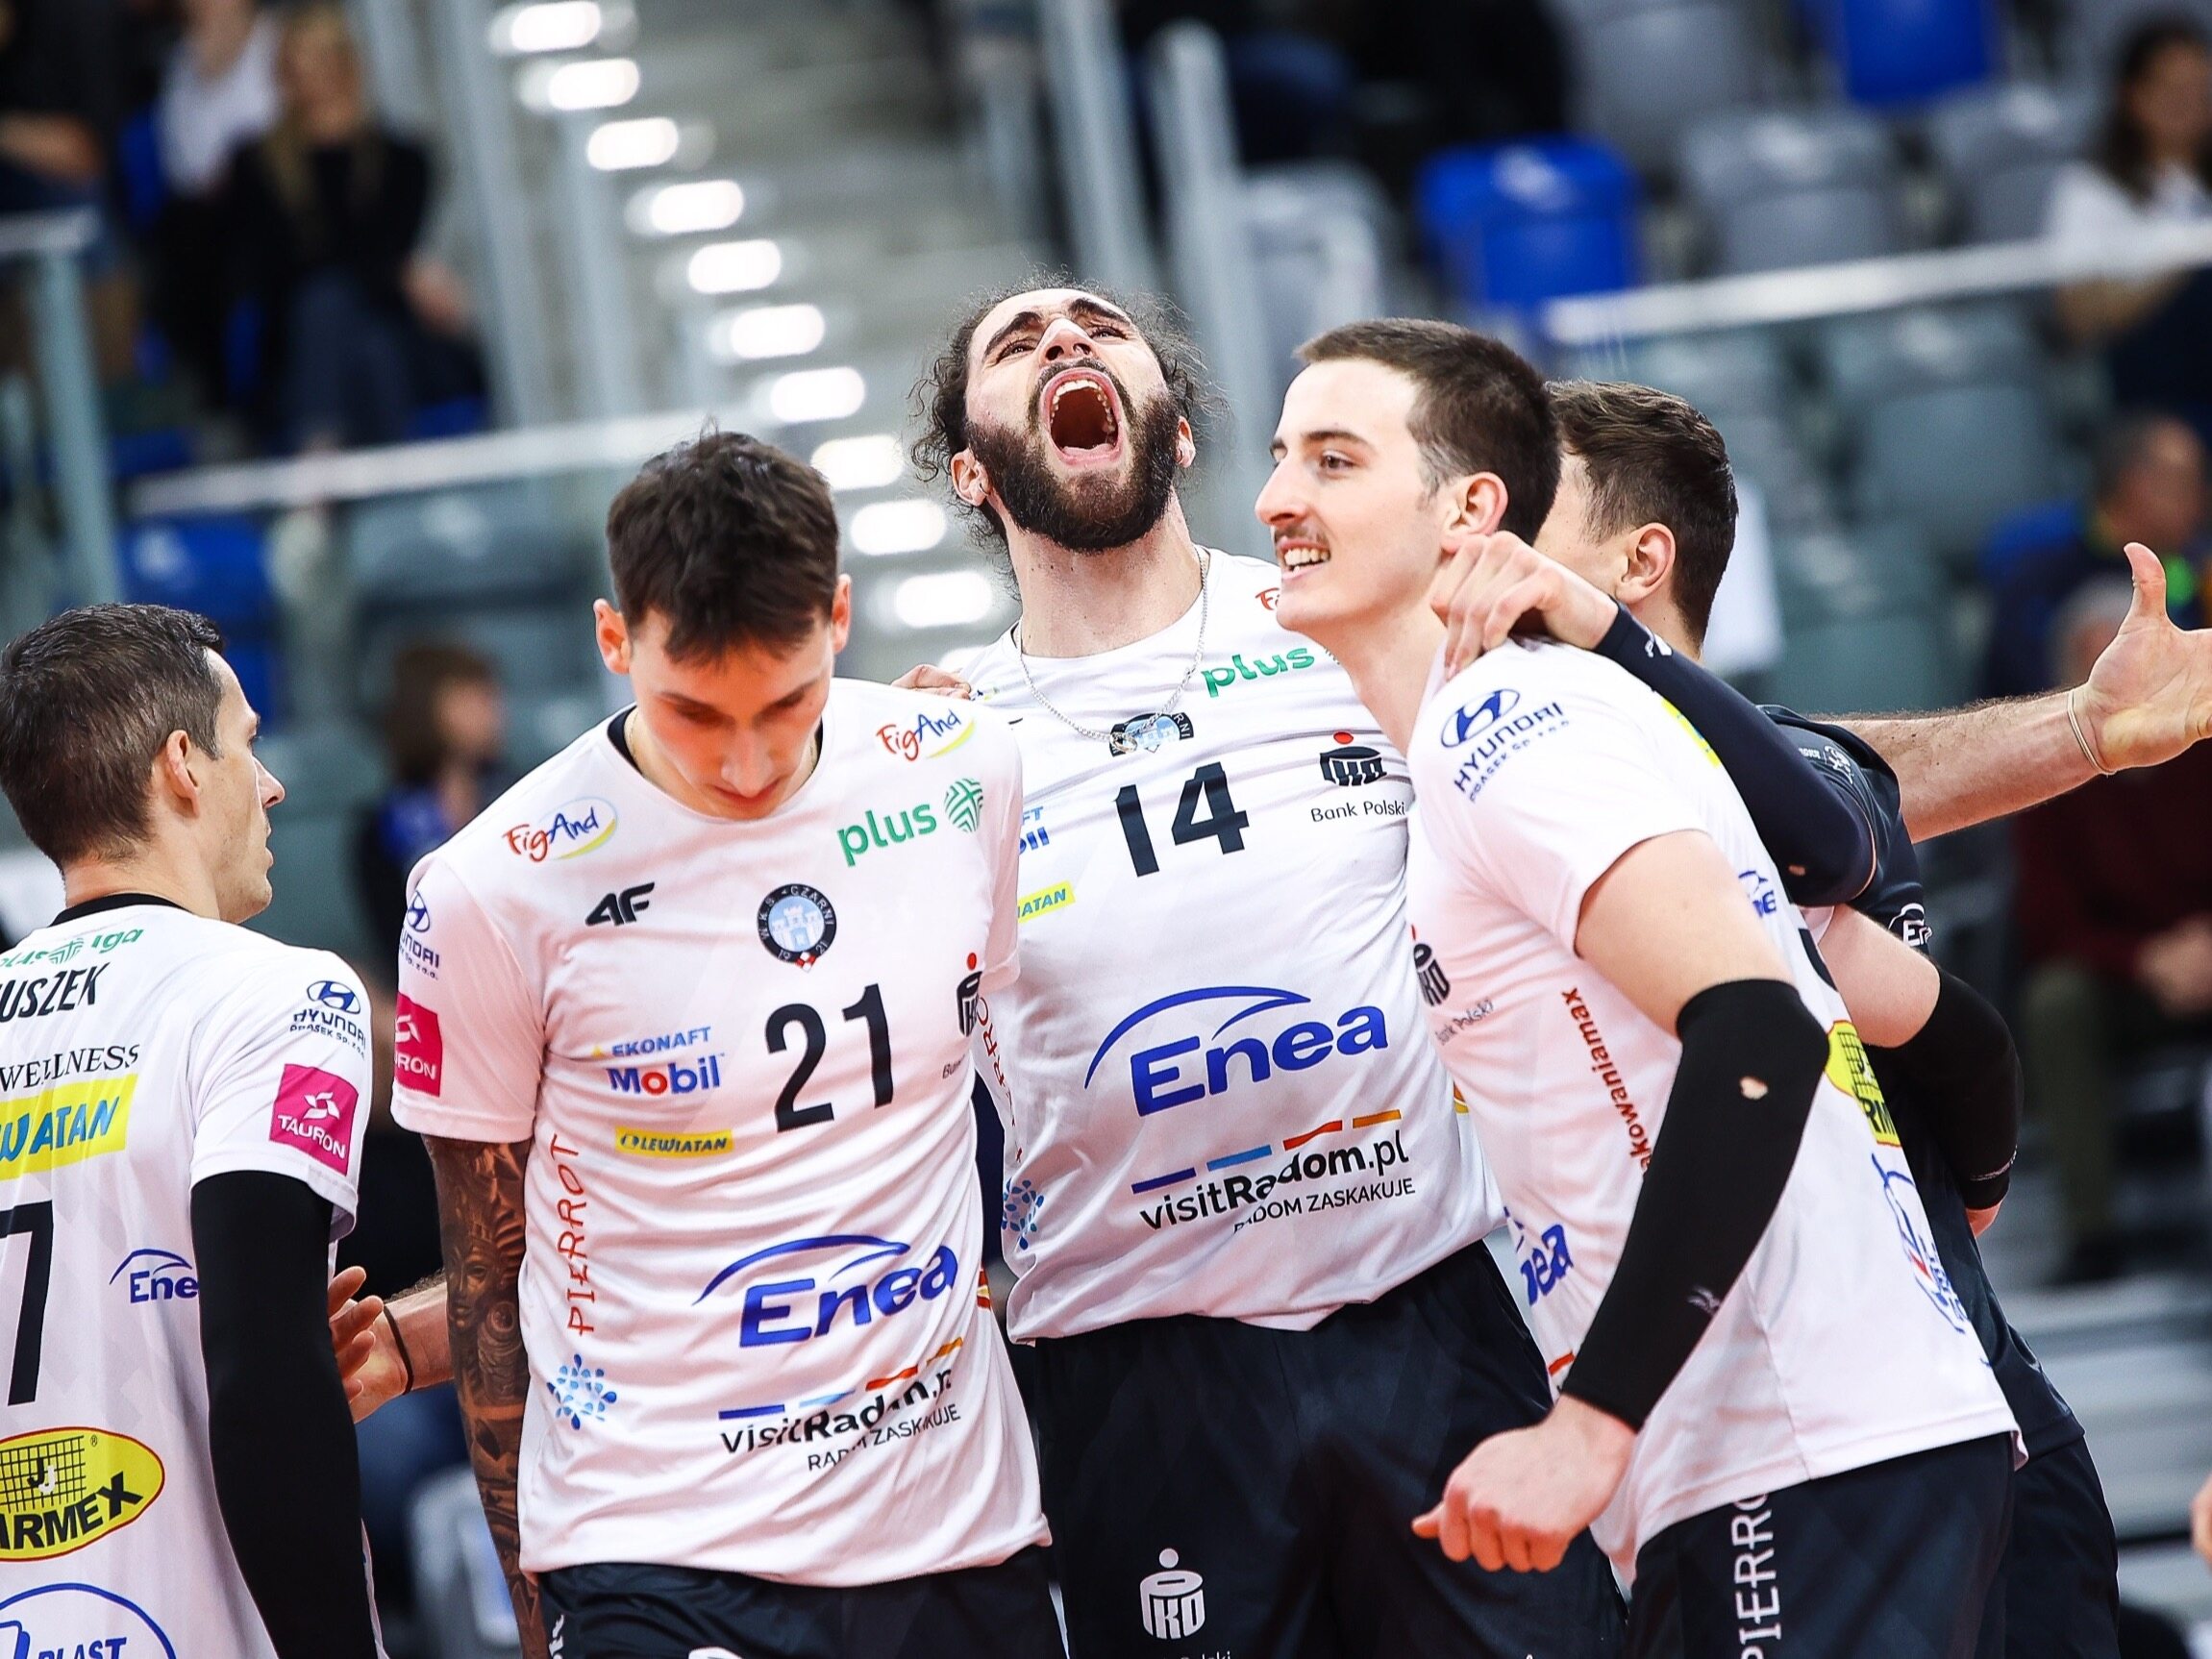 They won the match after a two-year break!  An amazing story in PlusLiga